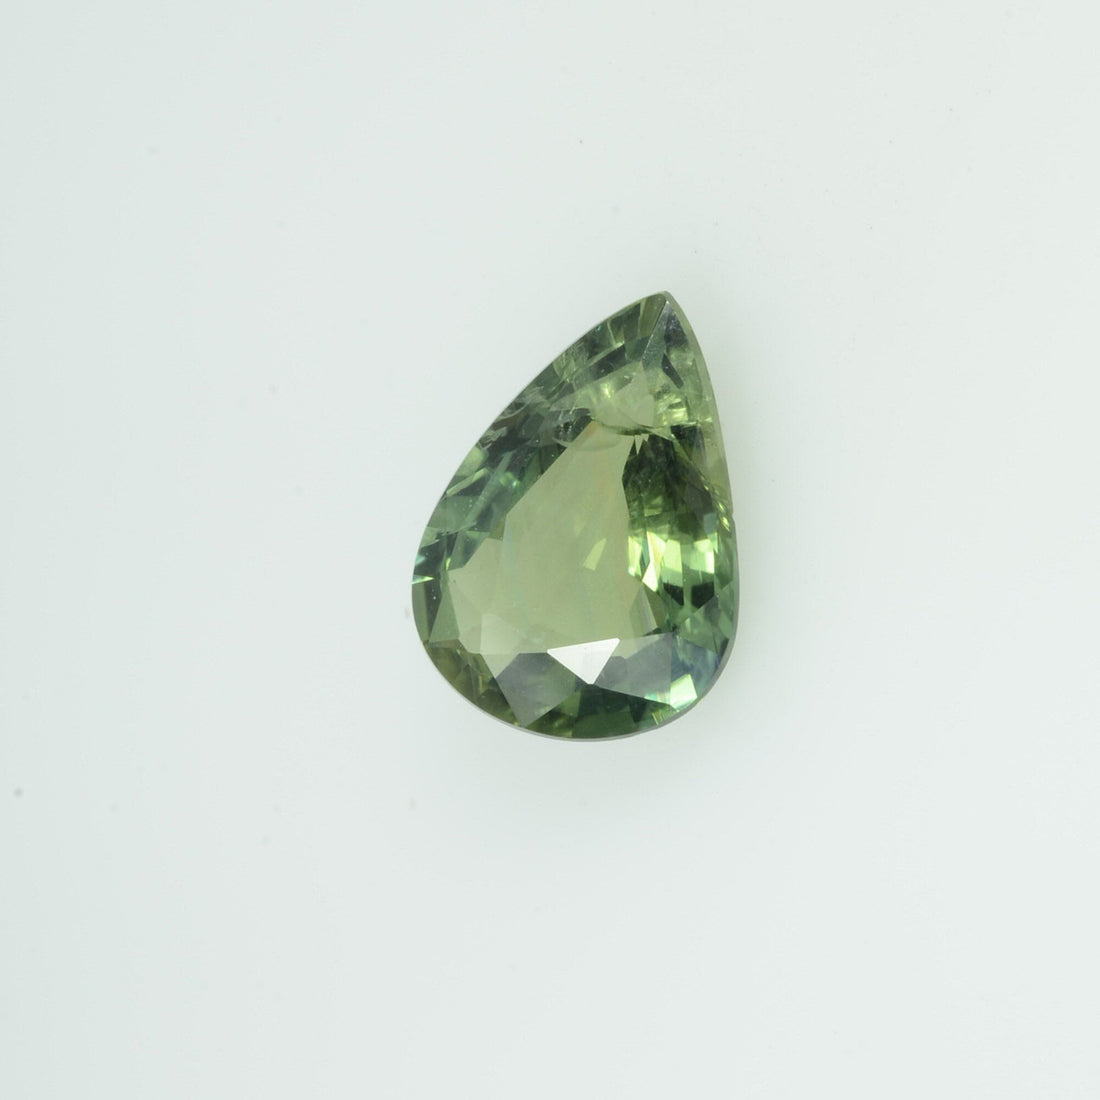 1.36 Cts Natural Green Sapphire Loose Gemstone Oval Cut